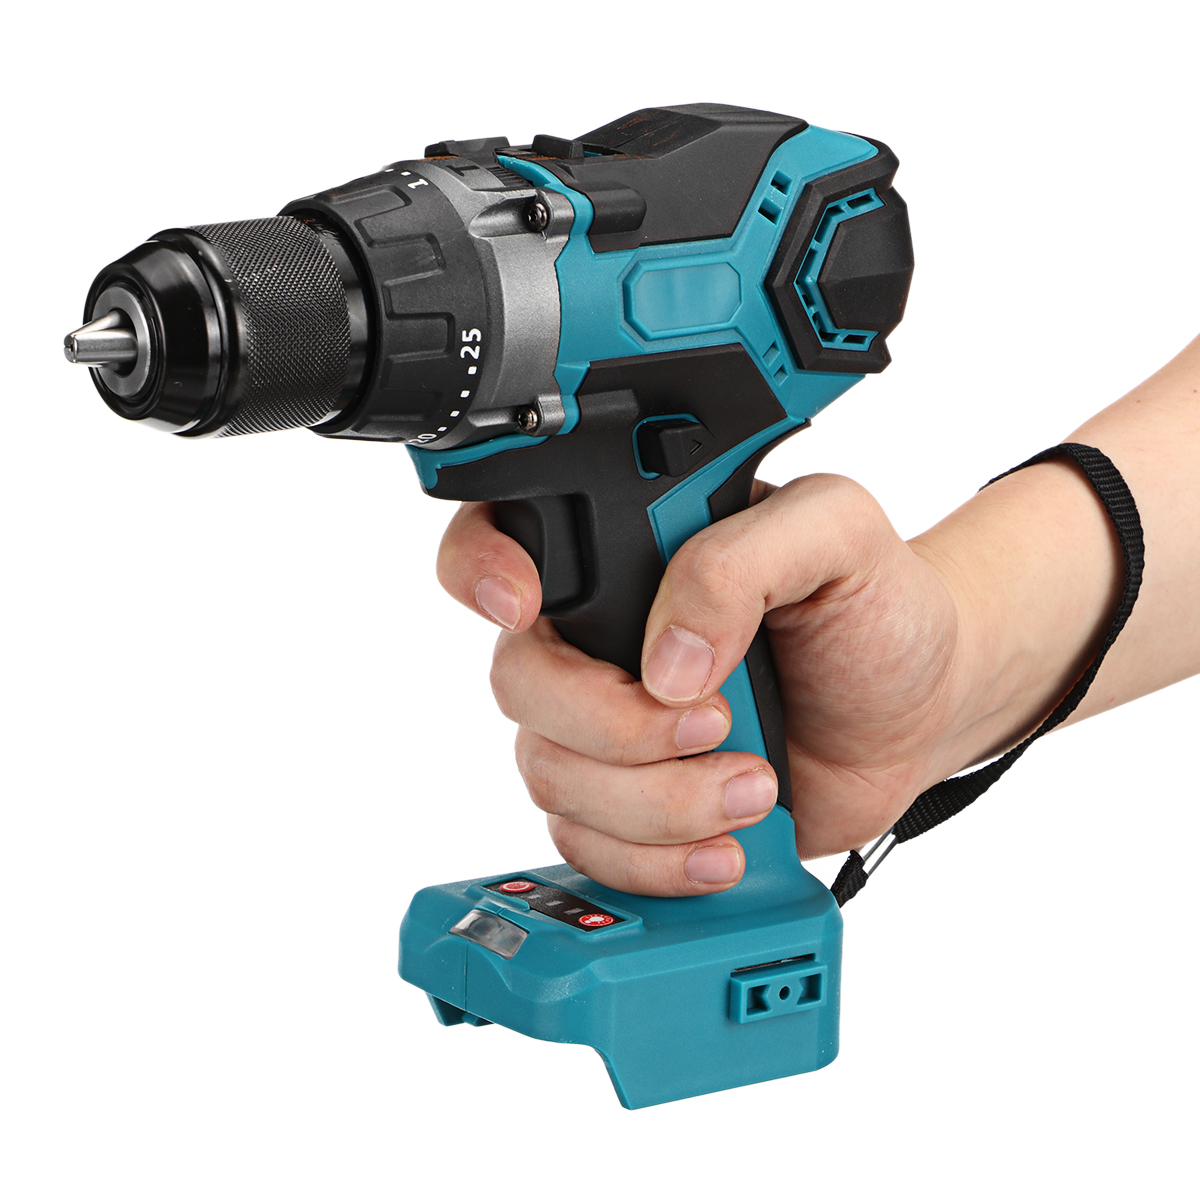 3-IN-1-Brushless-Electric-Hammer-Drill-Screwdriver-13mm-253-Torque-Cordless-Impact-Drill-For-Makita--1861682-6